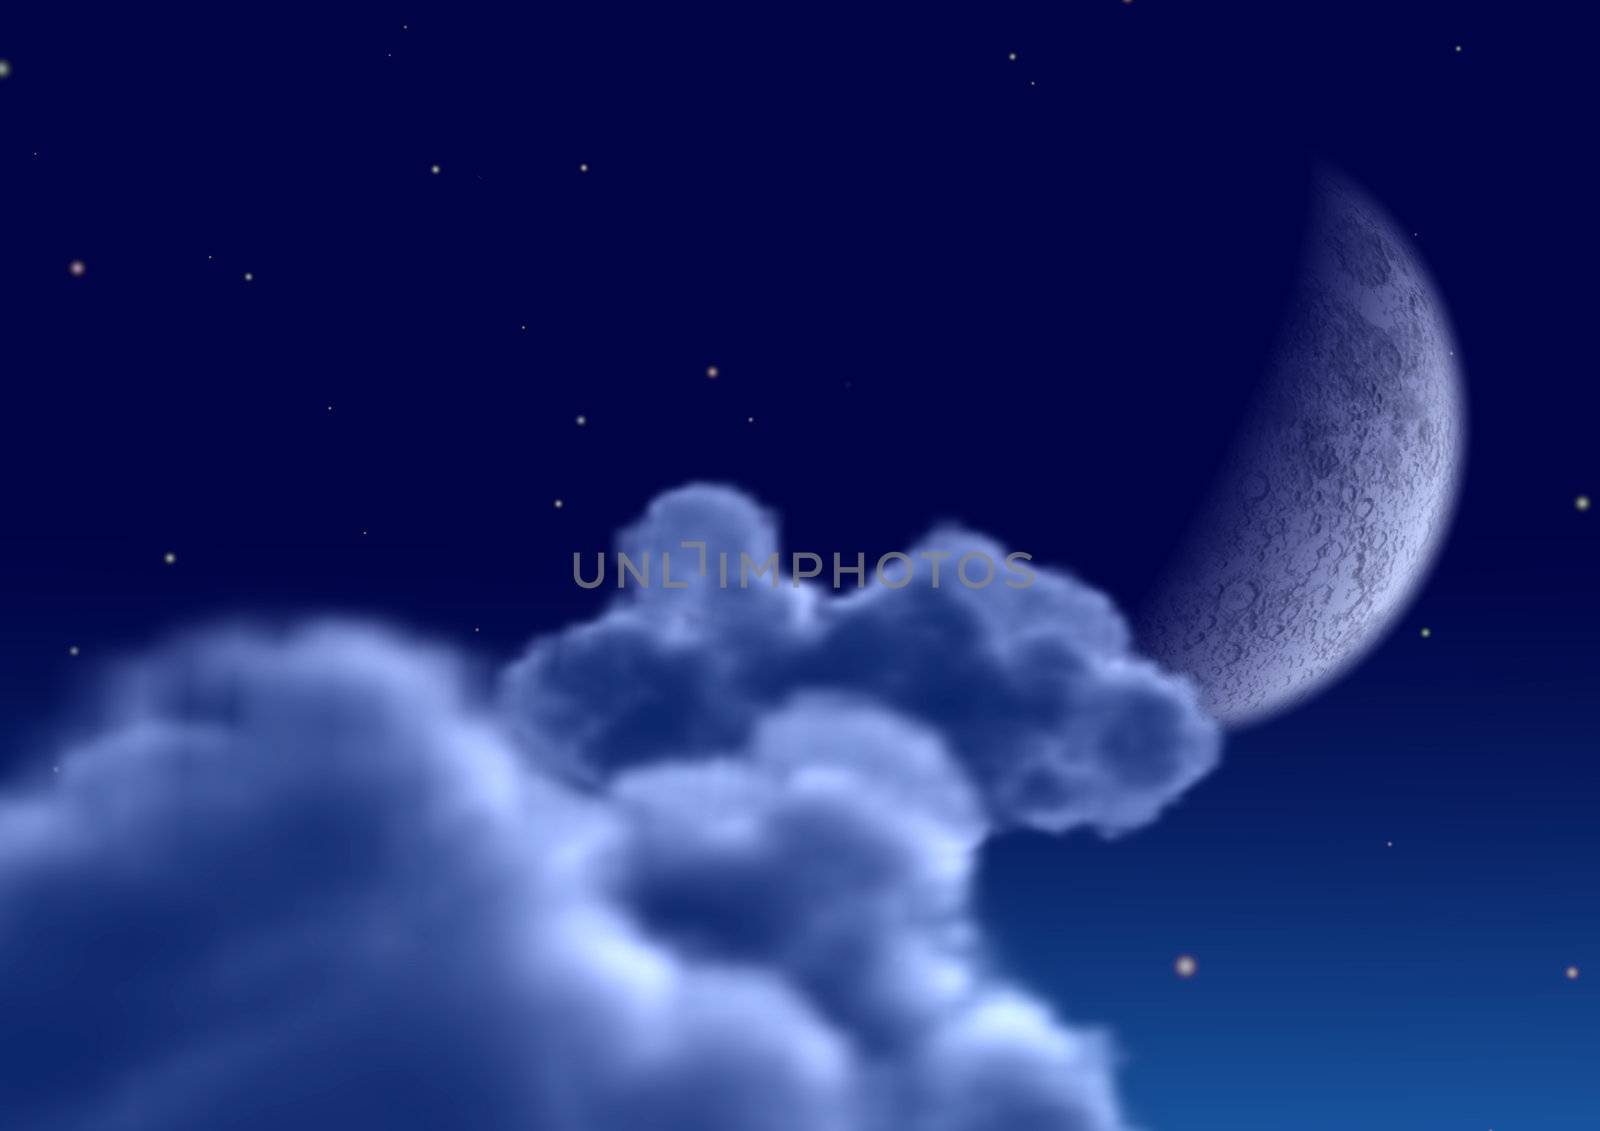 The moon in clouds (the Detailed night image of the moon)